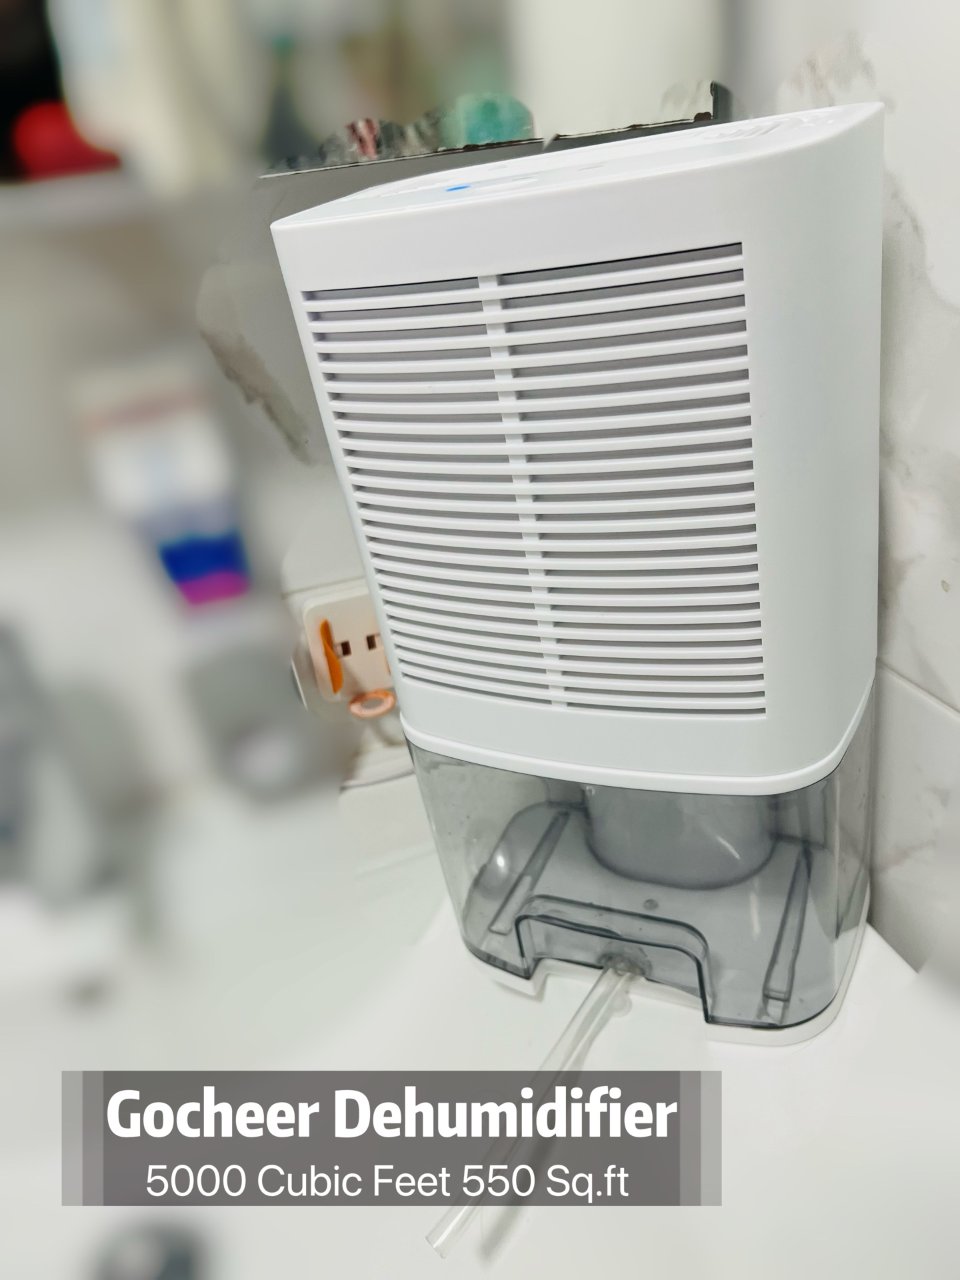 Amazon.com - Gocheer Dehumidifier for Basement 5000 Cubic Feet 550 Sq.ft Dehumidifiers with Drain Hose for Basements and Bathroom Remove Humidity for Bedroom Closet Kitchen Garage RV with 2000ML (64oz) Water Tank -